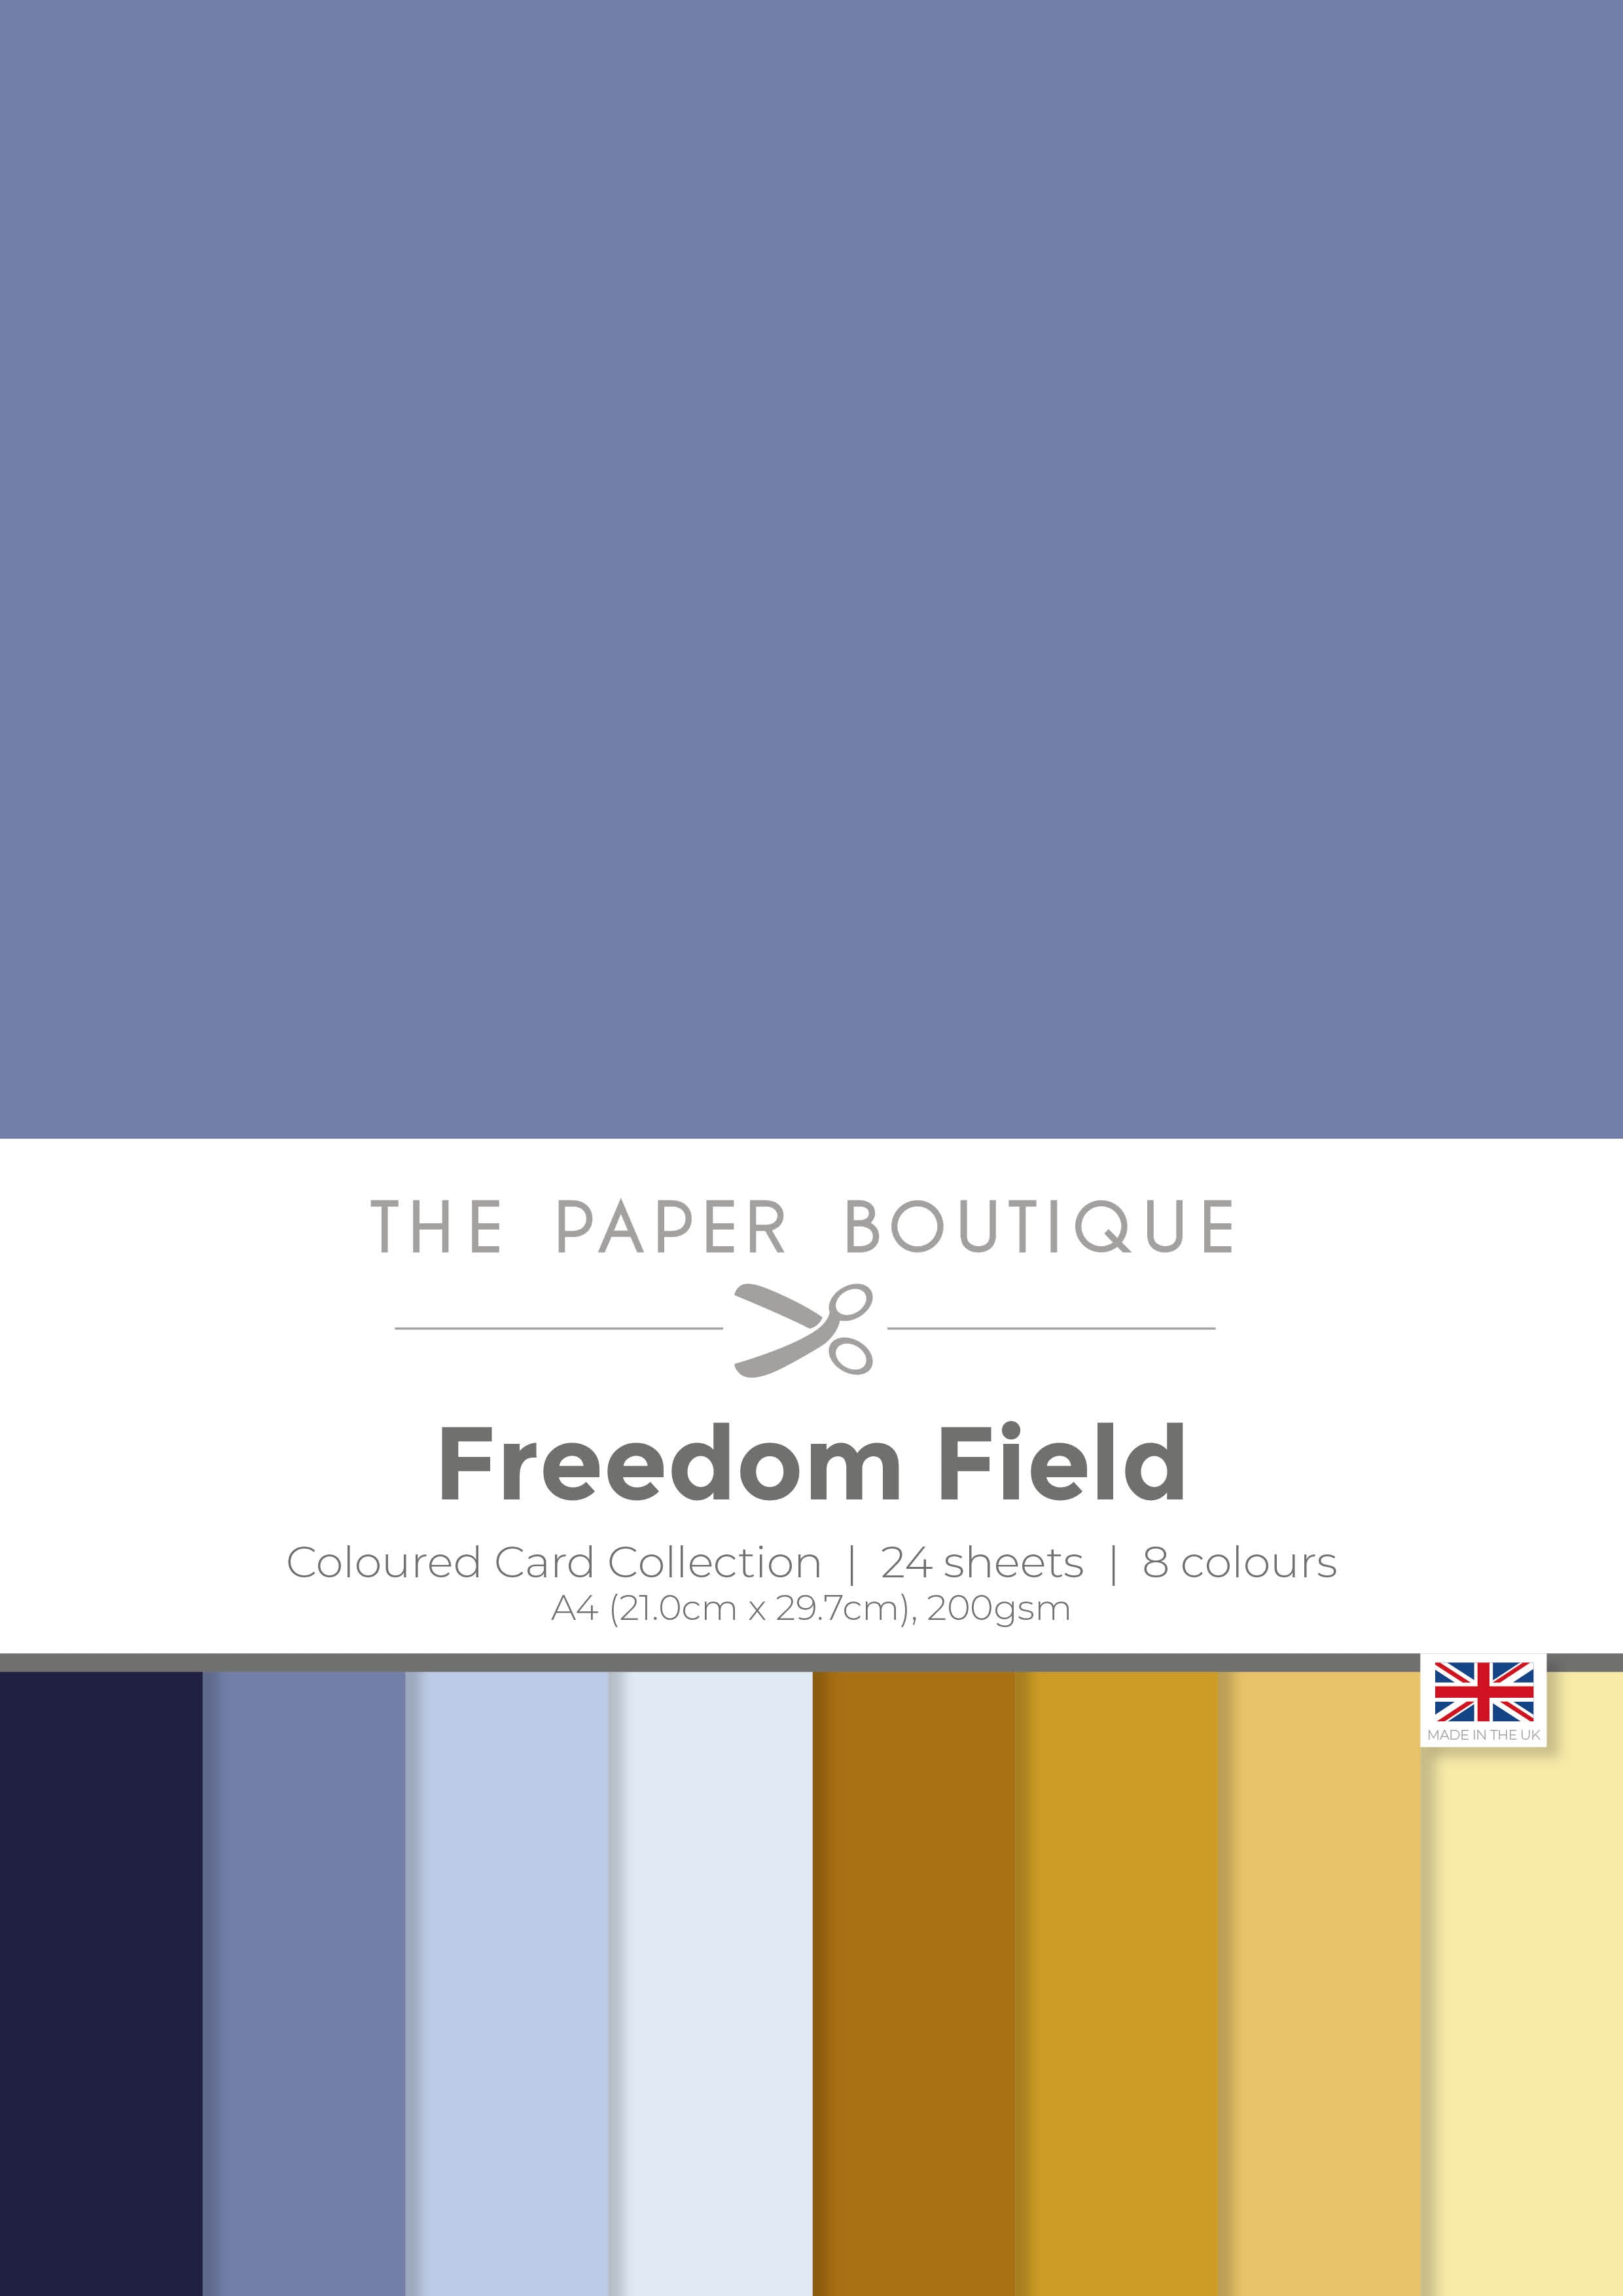 The Paper Boutique Freedom Field Colour Card Collection